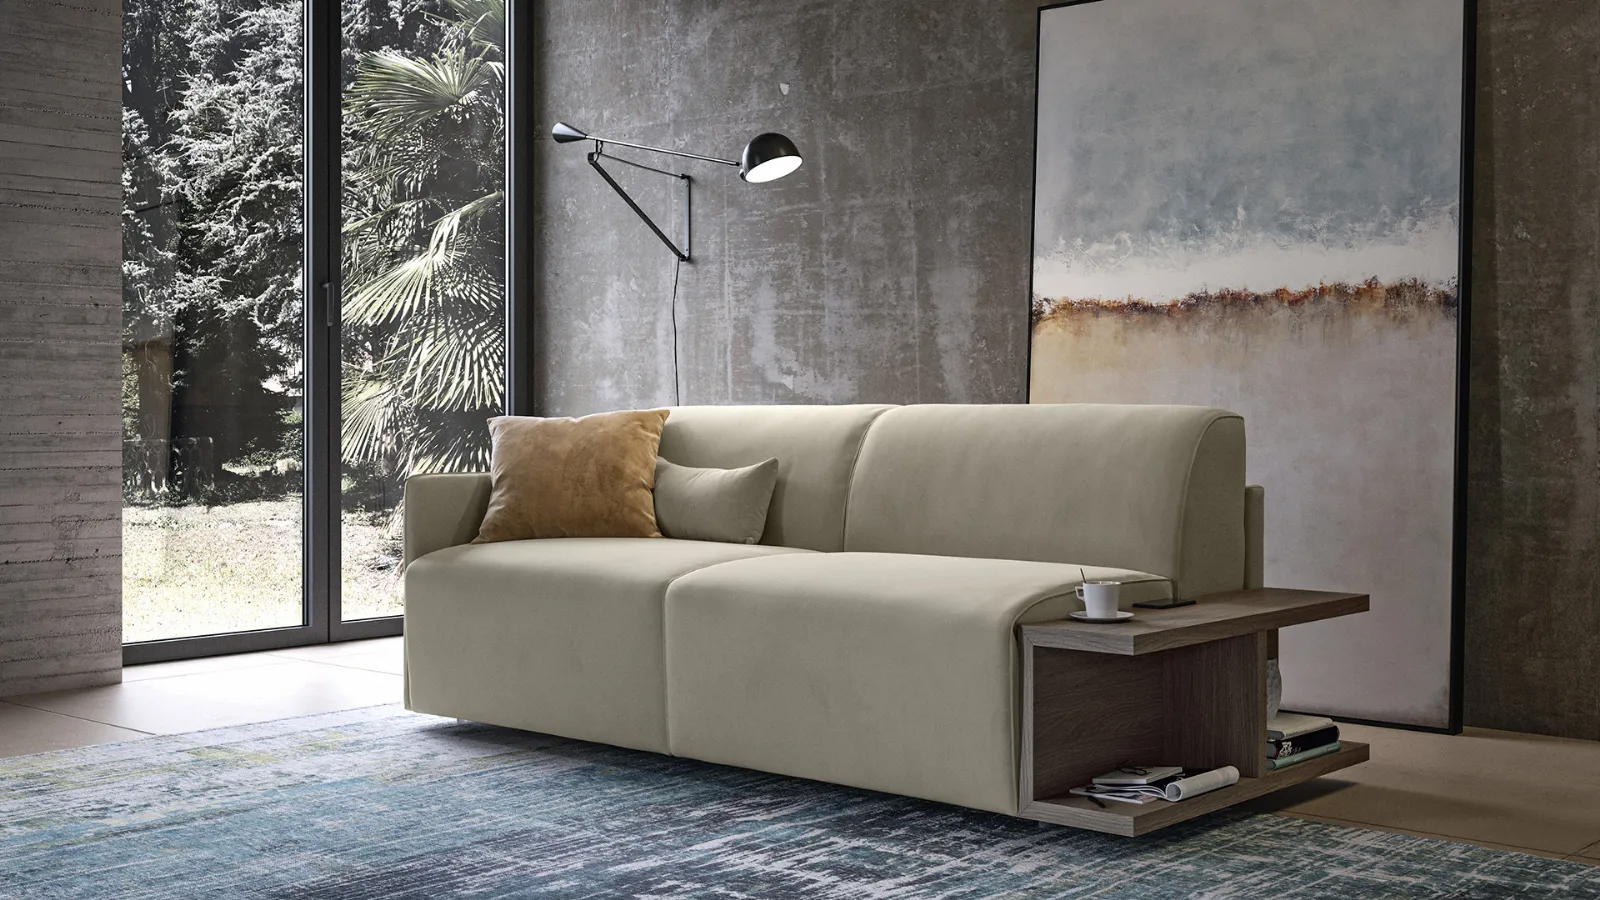 Design For A Comfortable Sofa Bed